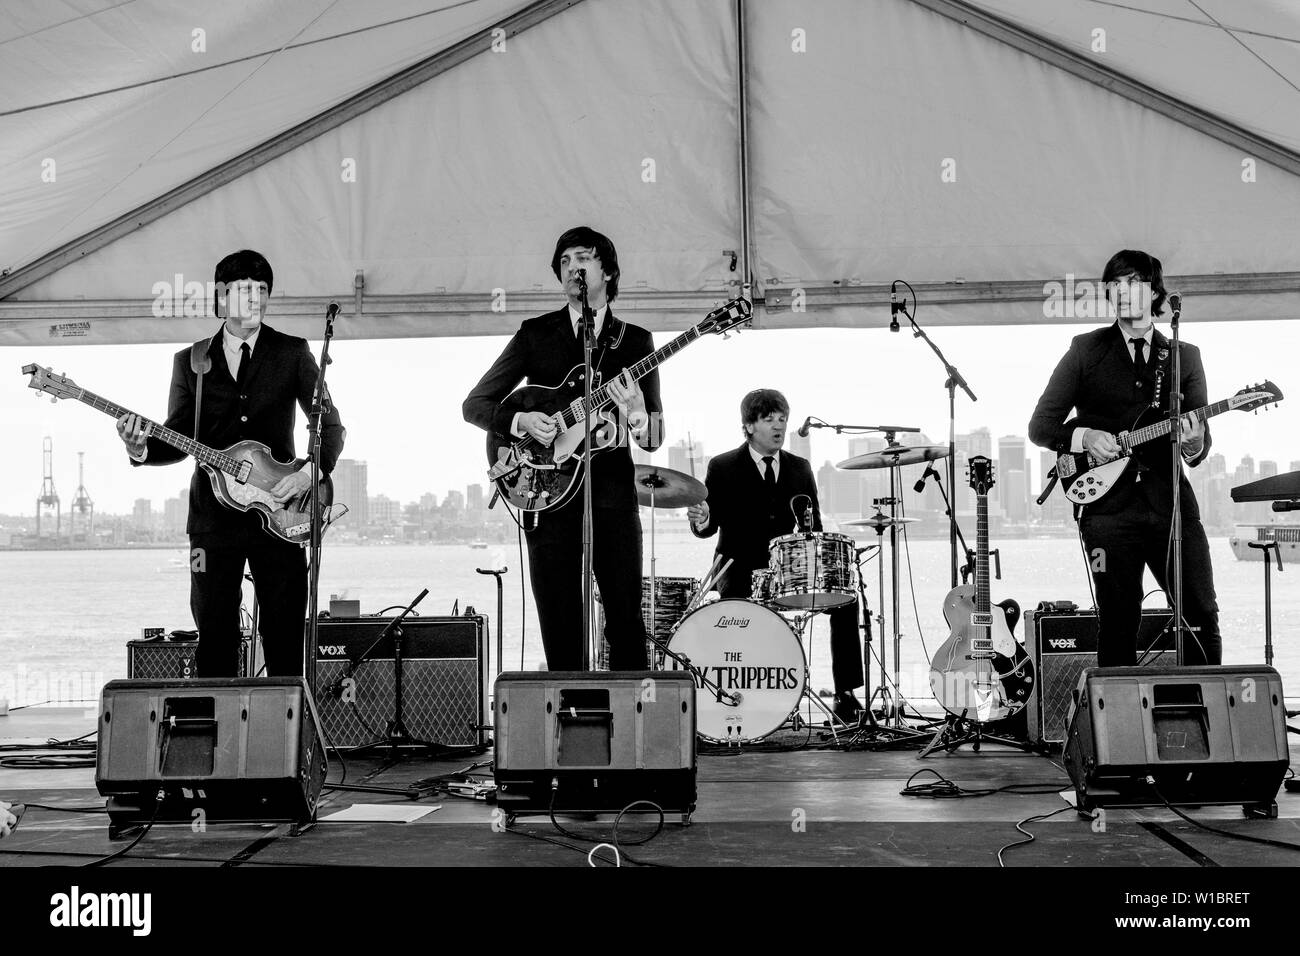 Day Trippers, Beatles cover band, Canada Day, Waterfront Park, North Vancouver, British Columbia, Canada Stock Photo